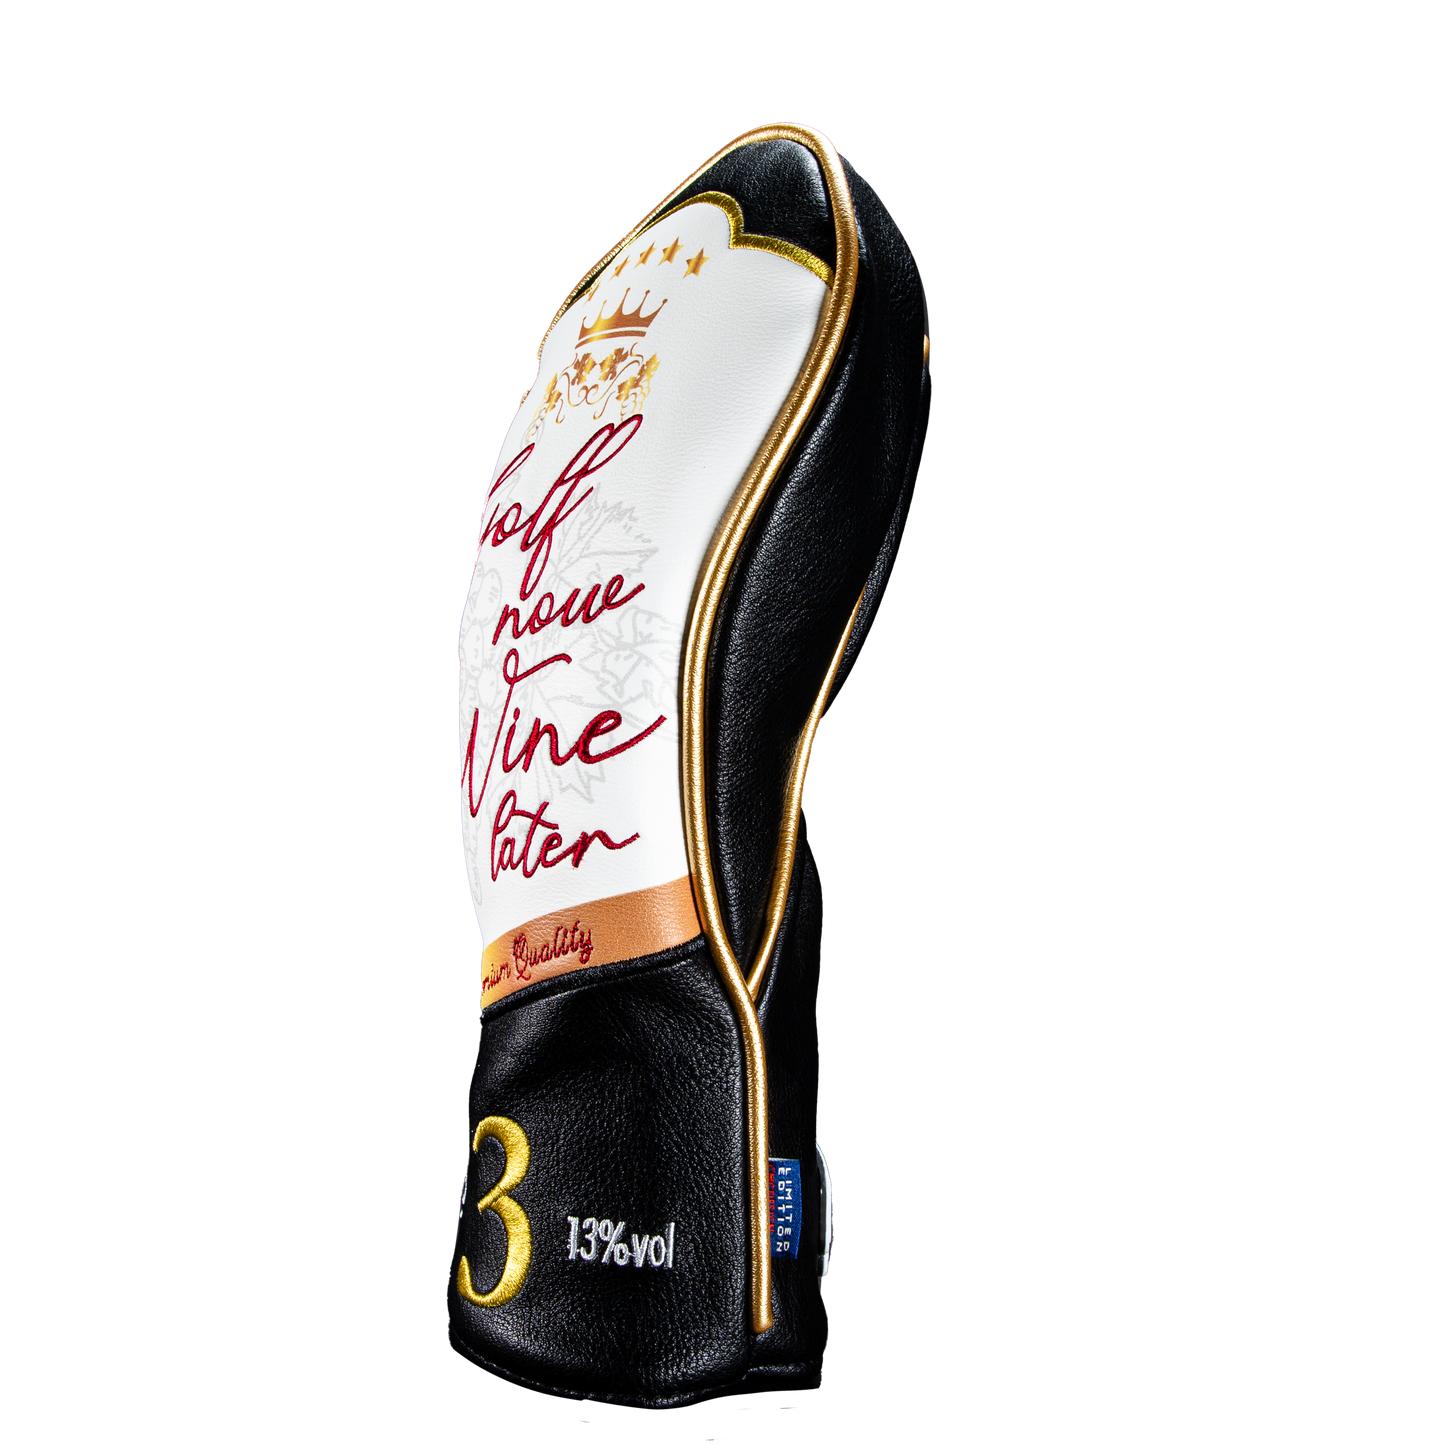 Golf Now, Wine Later 3 Wood Cover